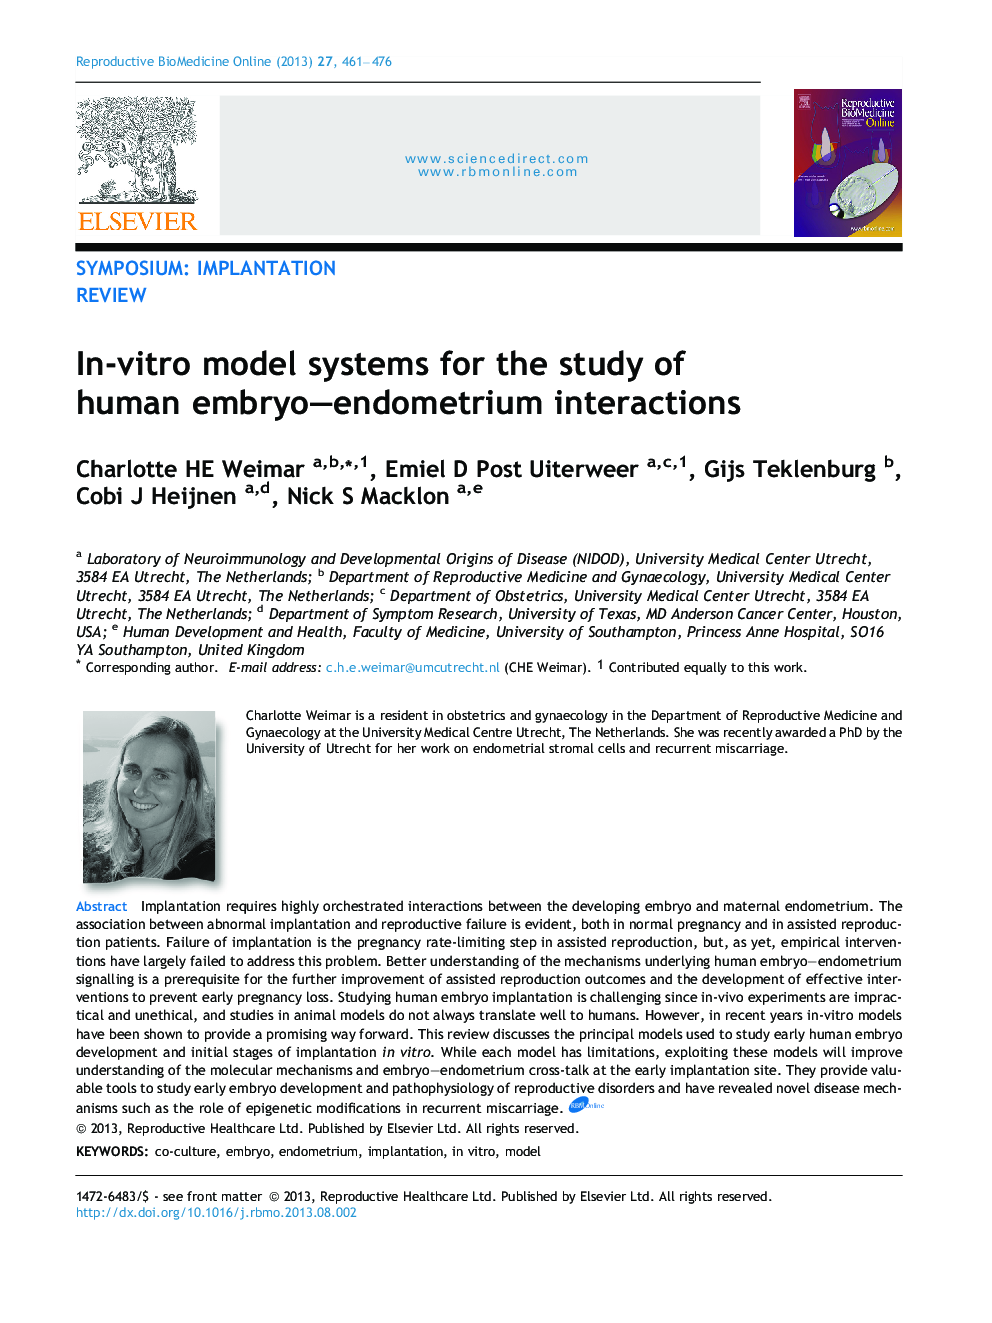 In-vitro model systems for the study of human embryo–endometrium interactions 